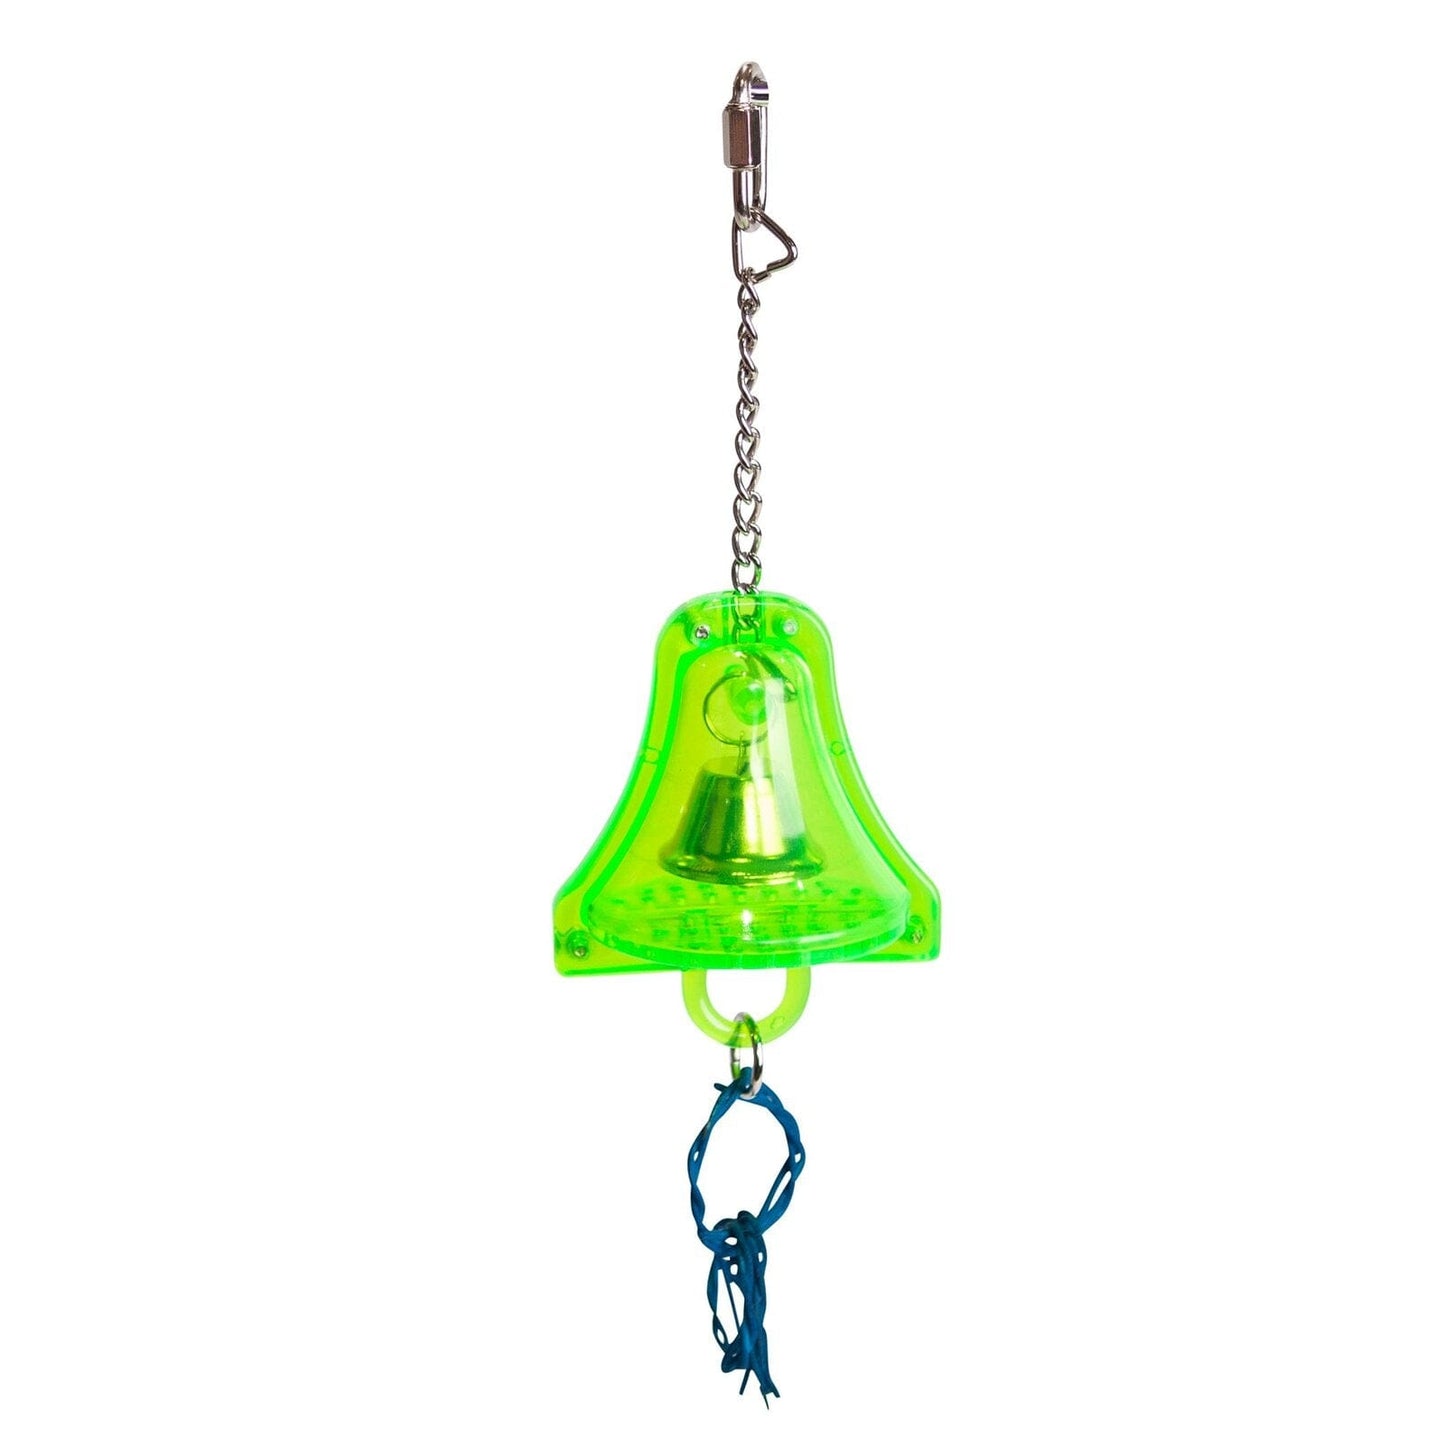 Kazoo Acrylic Bell with Wicker Rings from Kazoo Pet Co